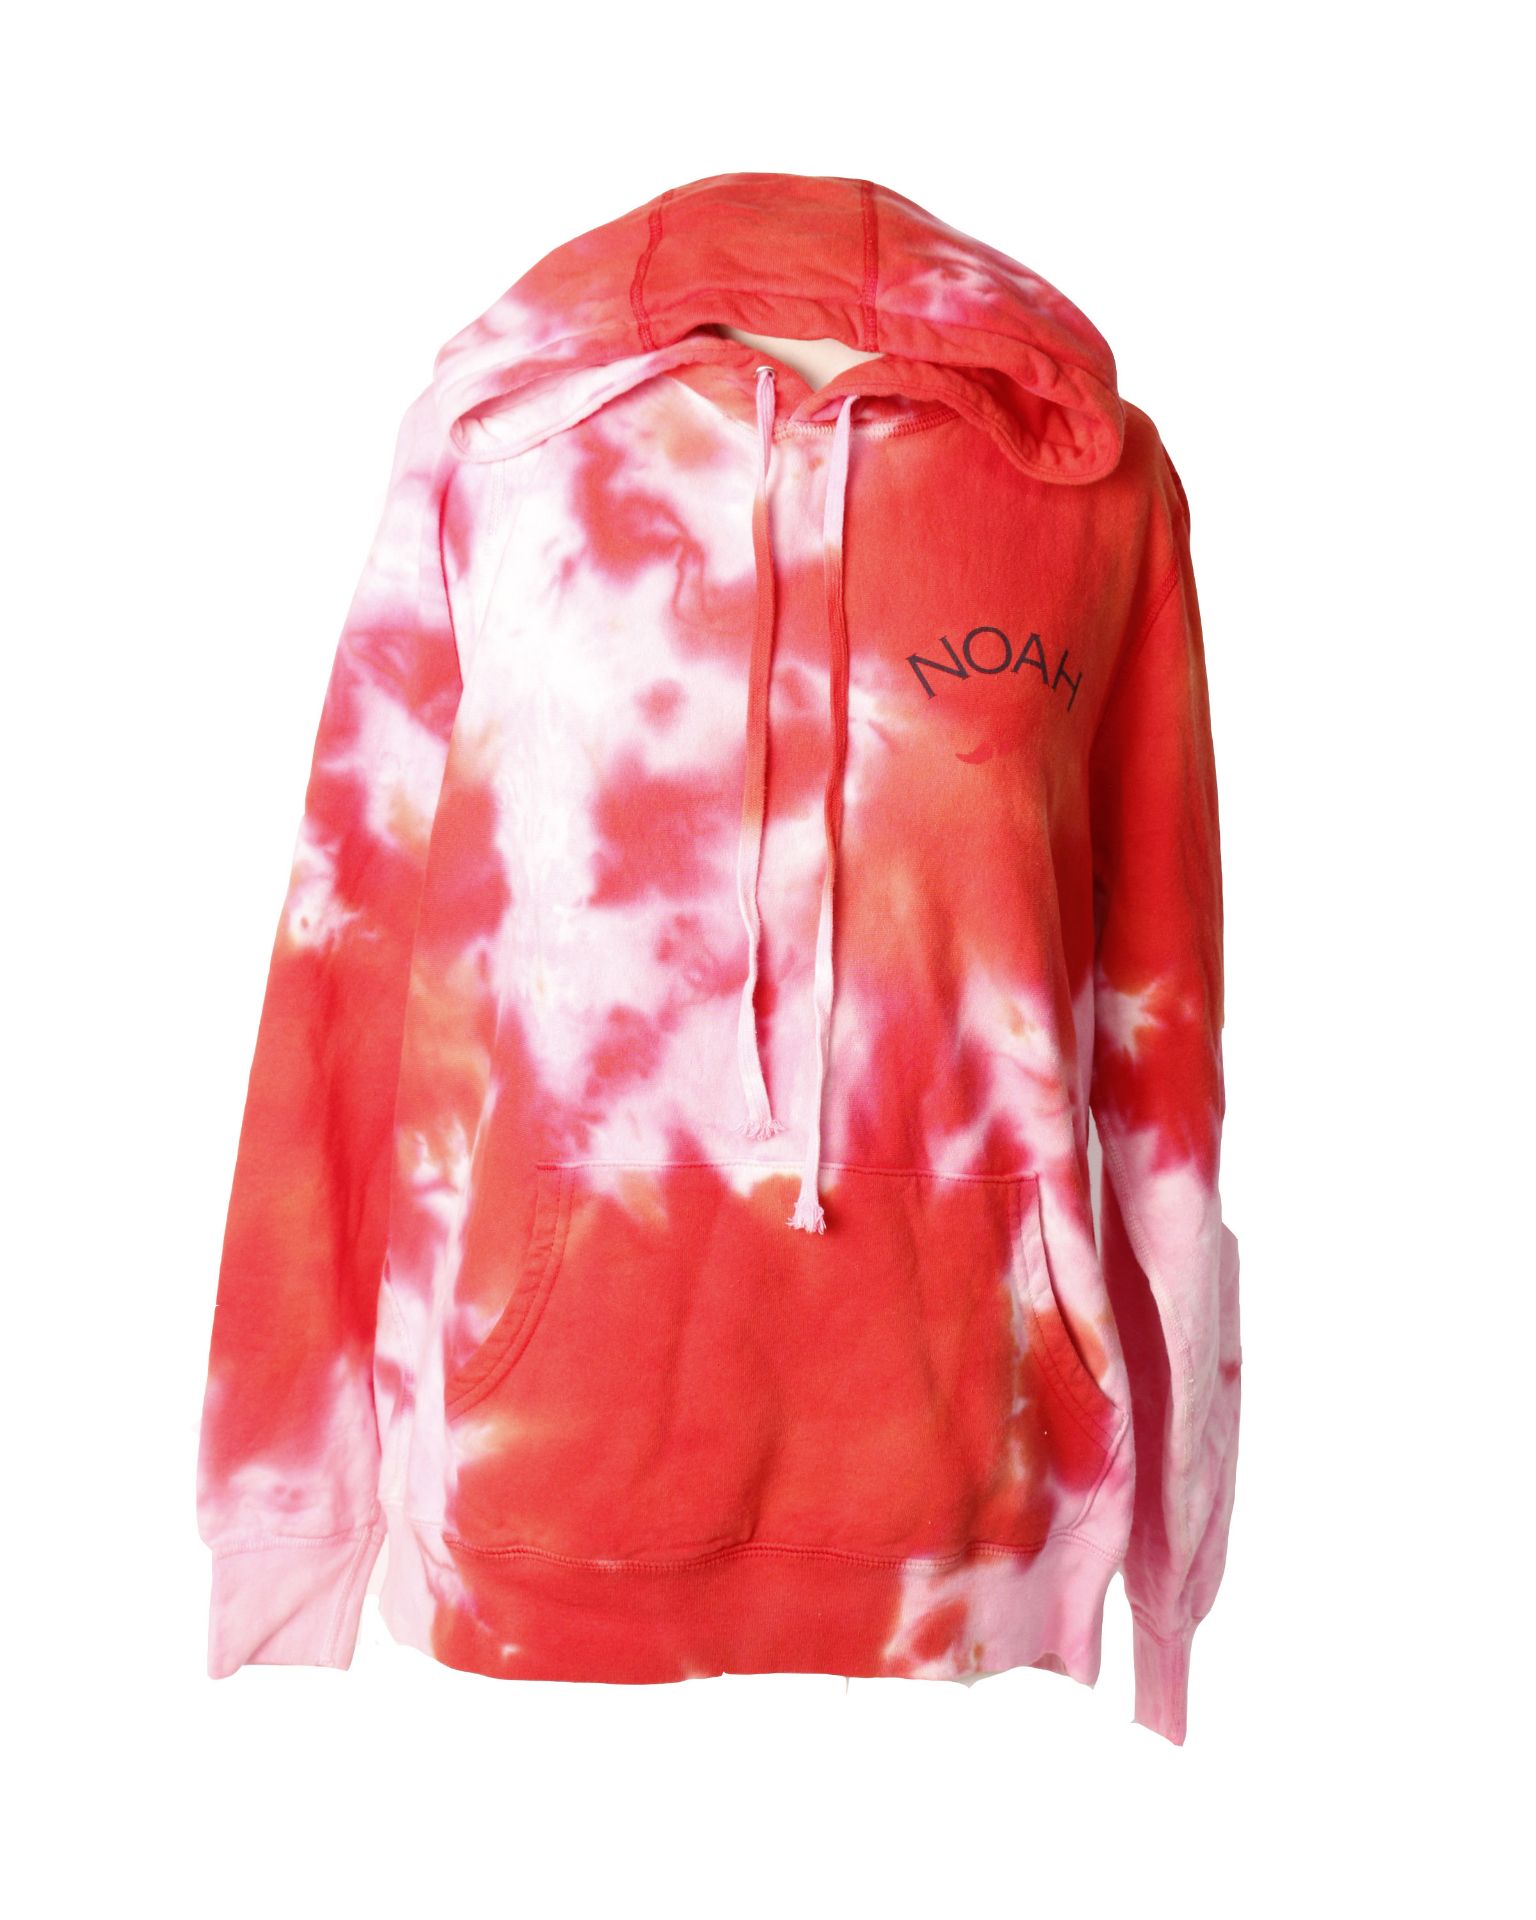 One as new Noah Sun Dyed Winged Foot hoodie in red (L). - Image 3 of 3